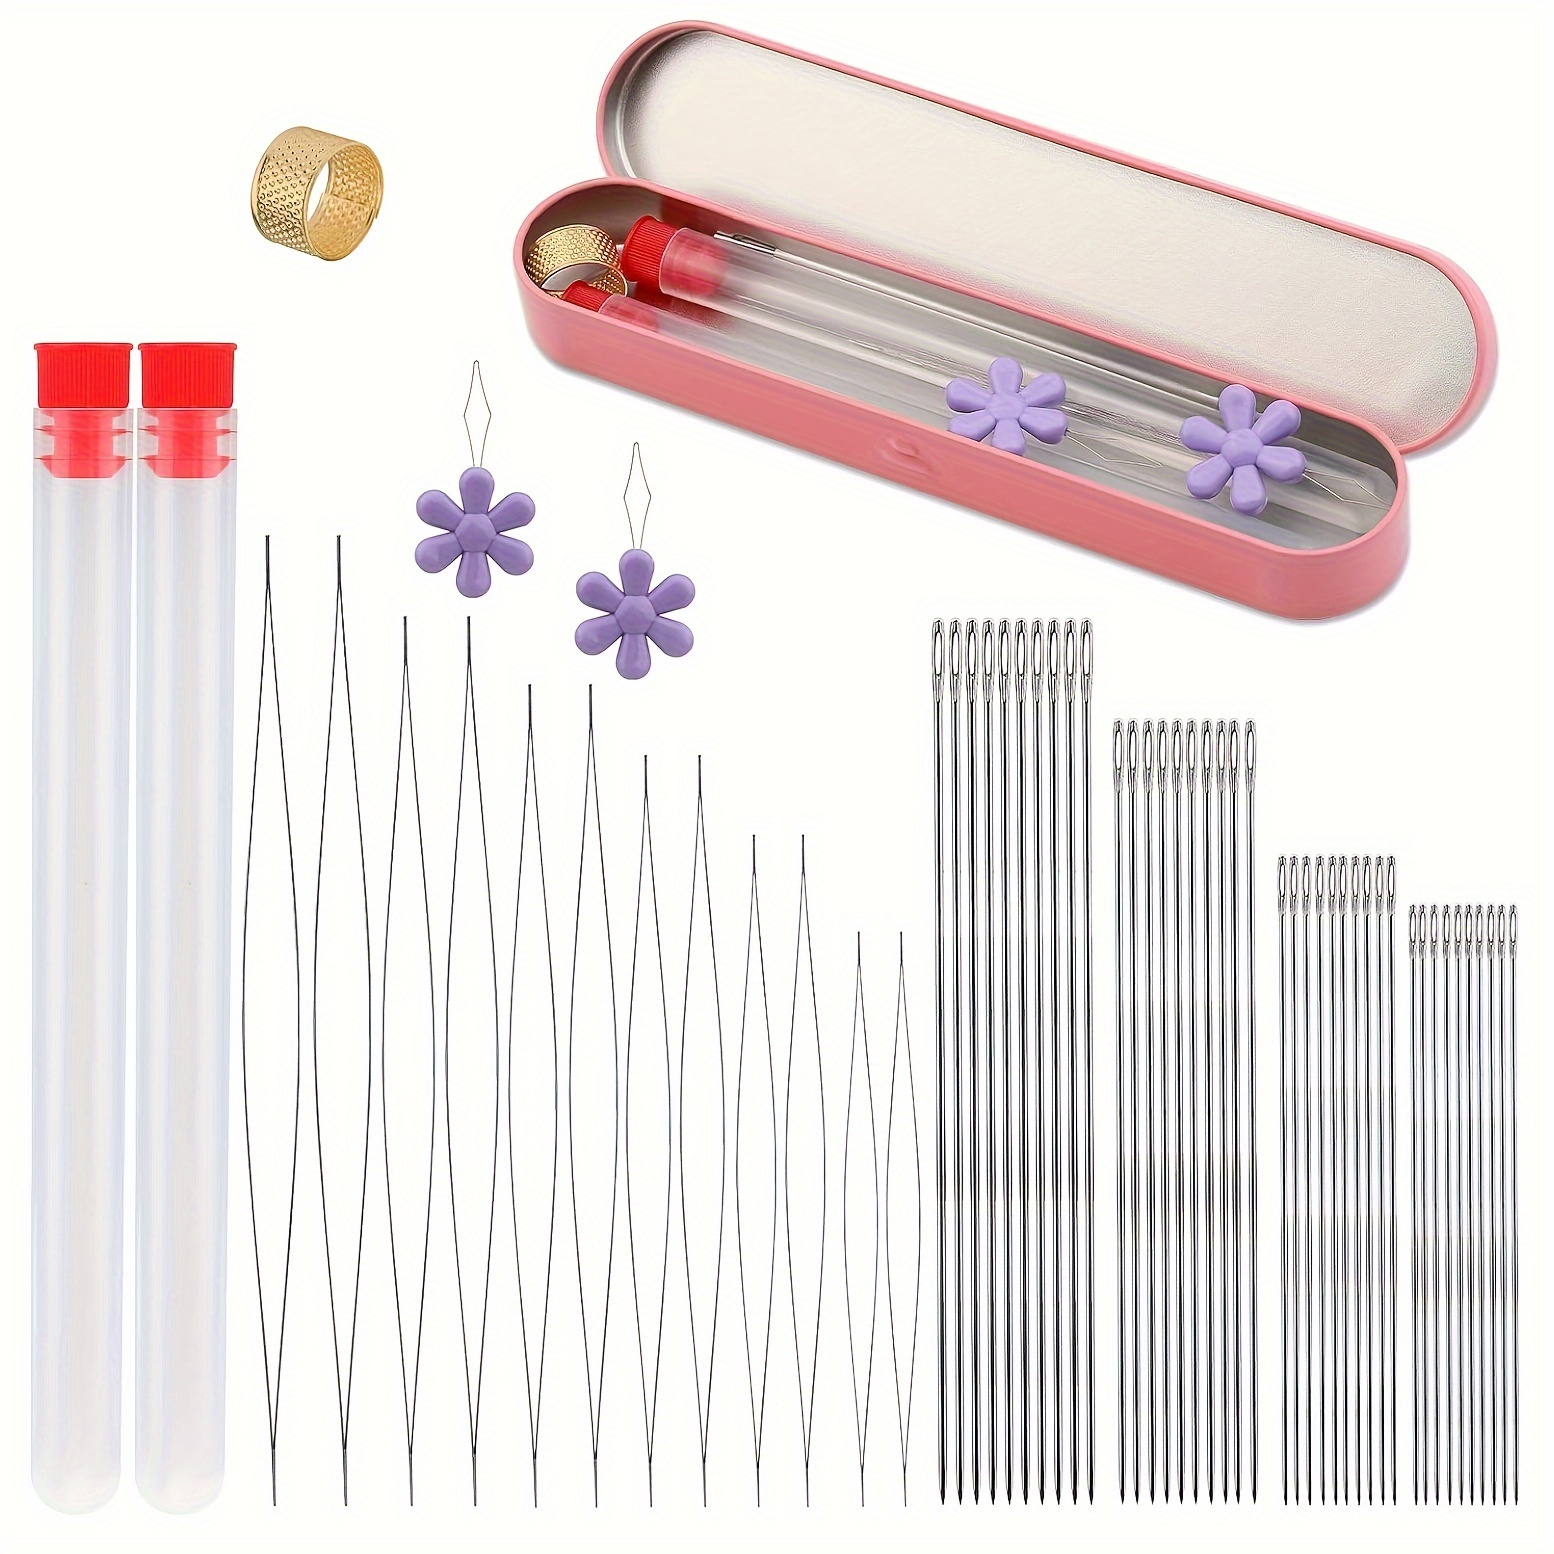 

Beading Needles Set For Jewelry Making - 58 Pcs, Includes 6 Sizes Big Eye & 4 Sizes Long Straight Seed Bead Needles With Threader And Needle Bottle, Metal Craft Tools For Bracelets